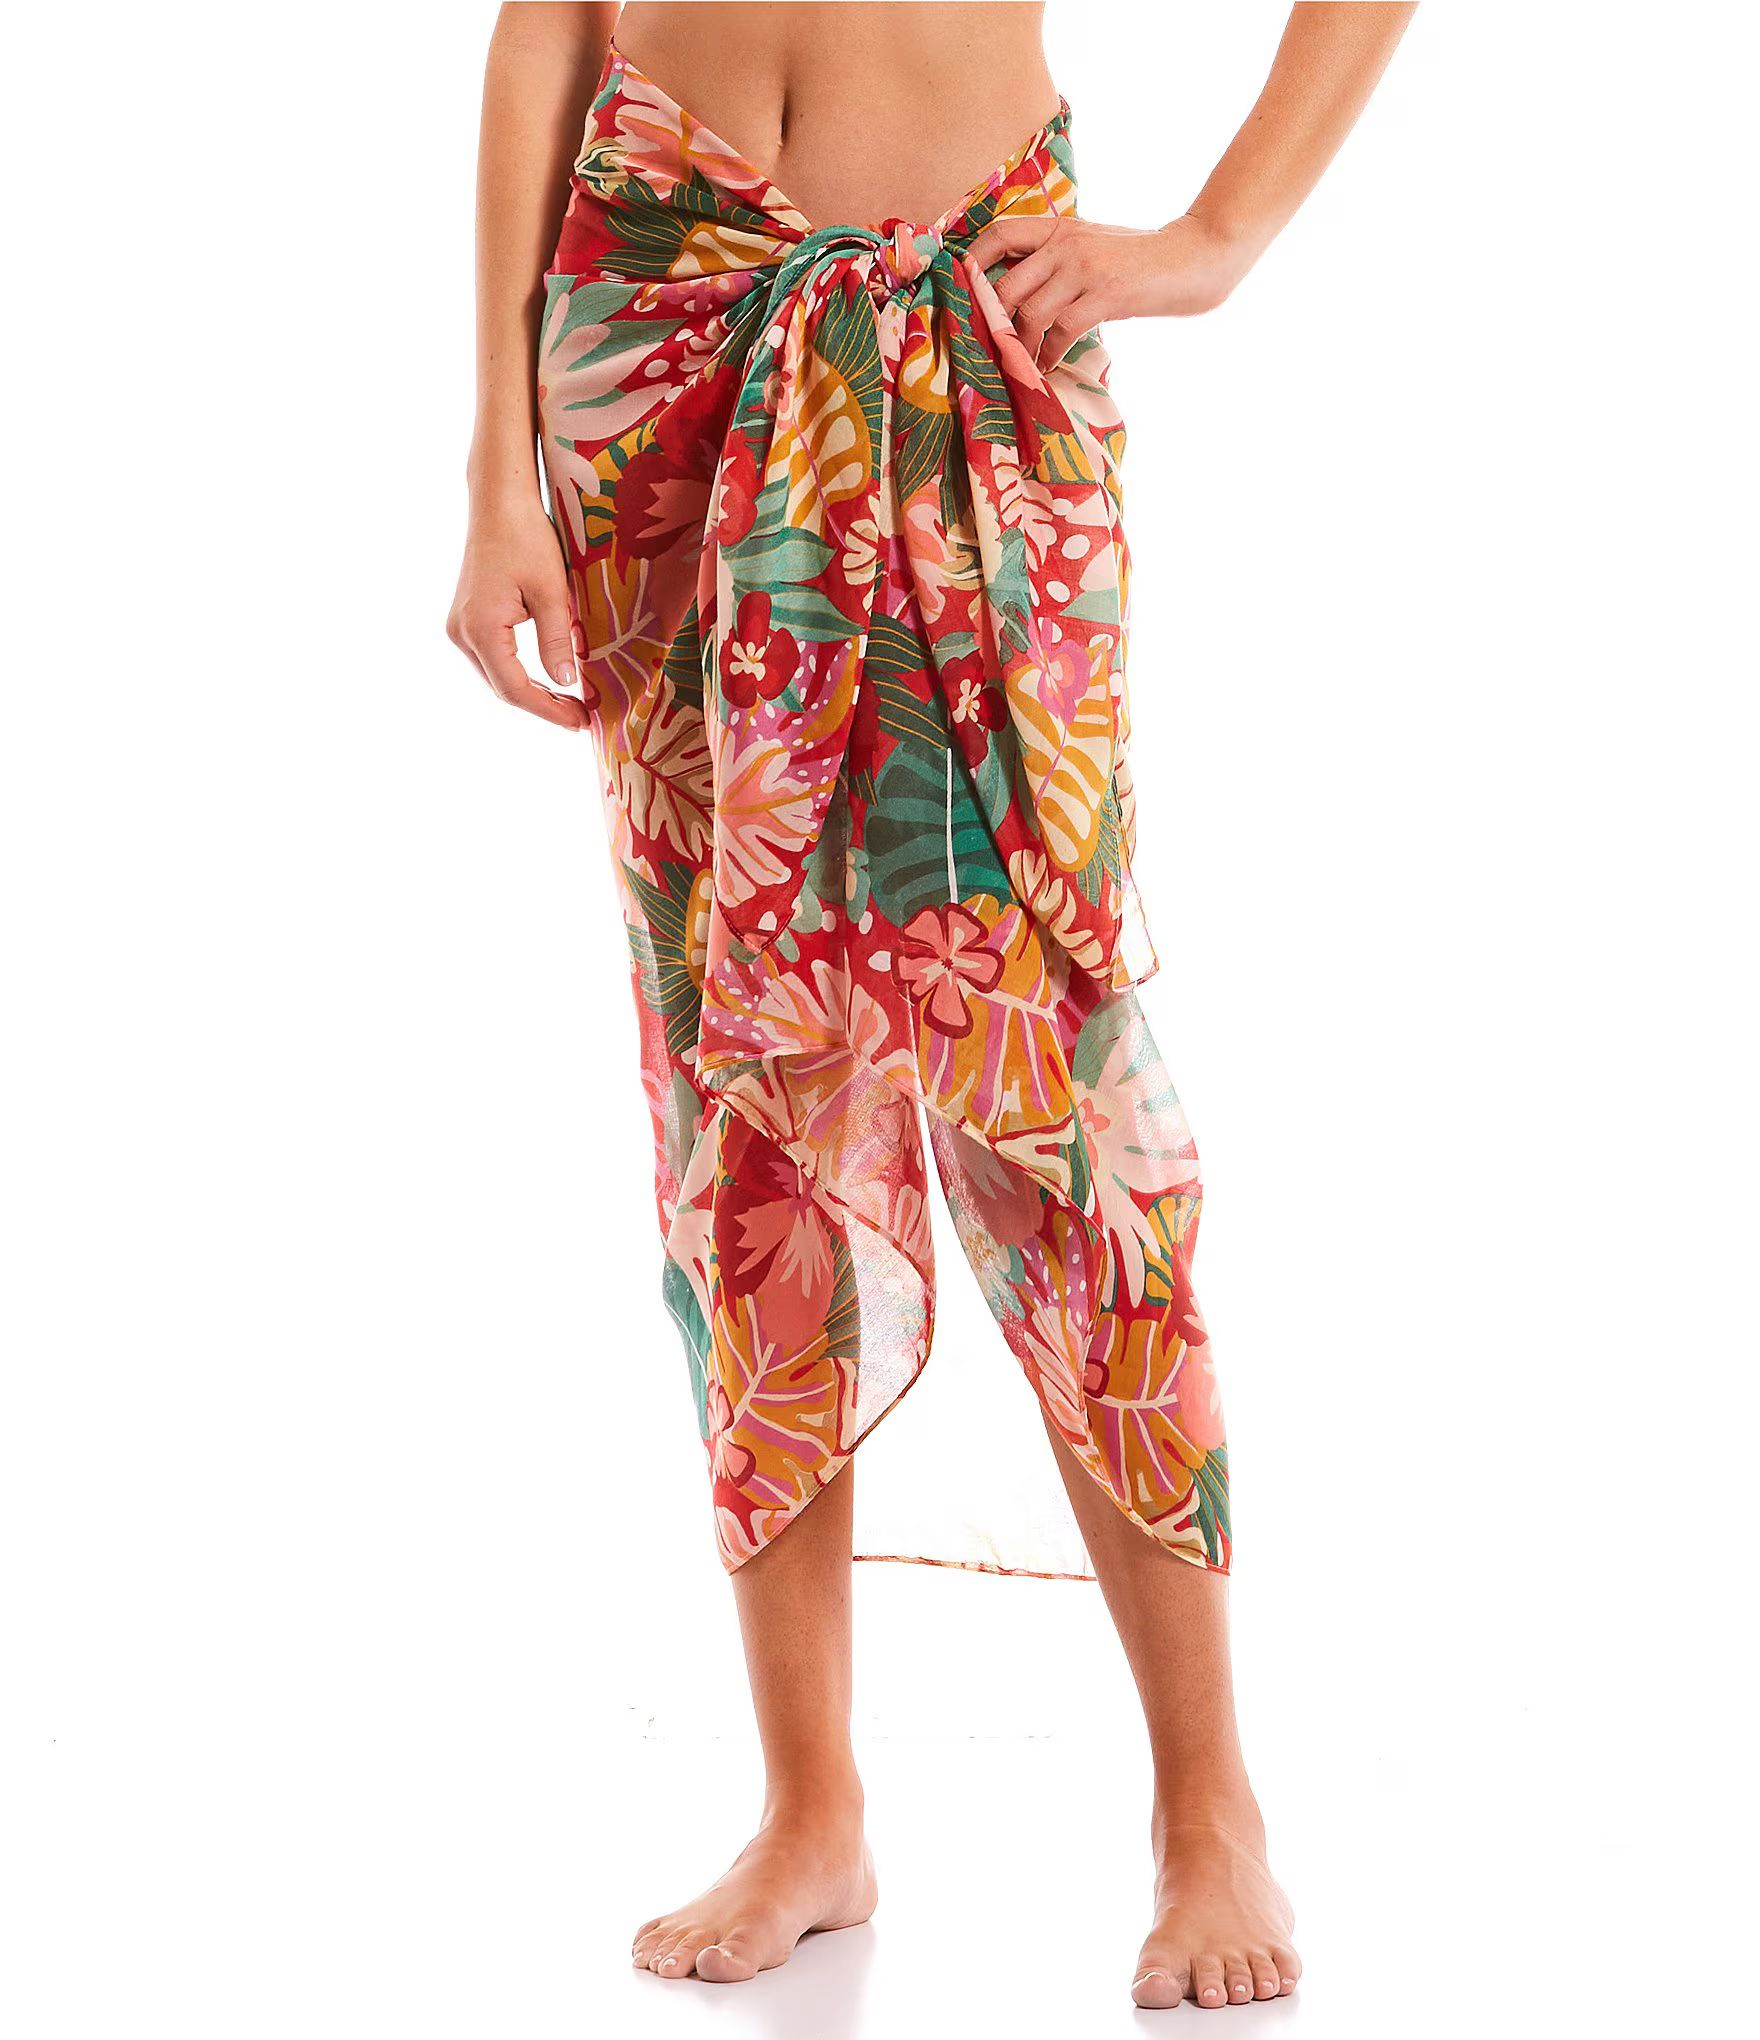 Bold Beauty Floral Print Classic Tie Pareo Sarong Swimsuit Cover-Up | Dillard's